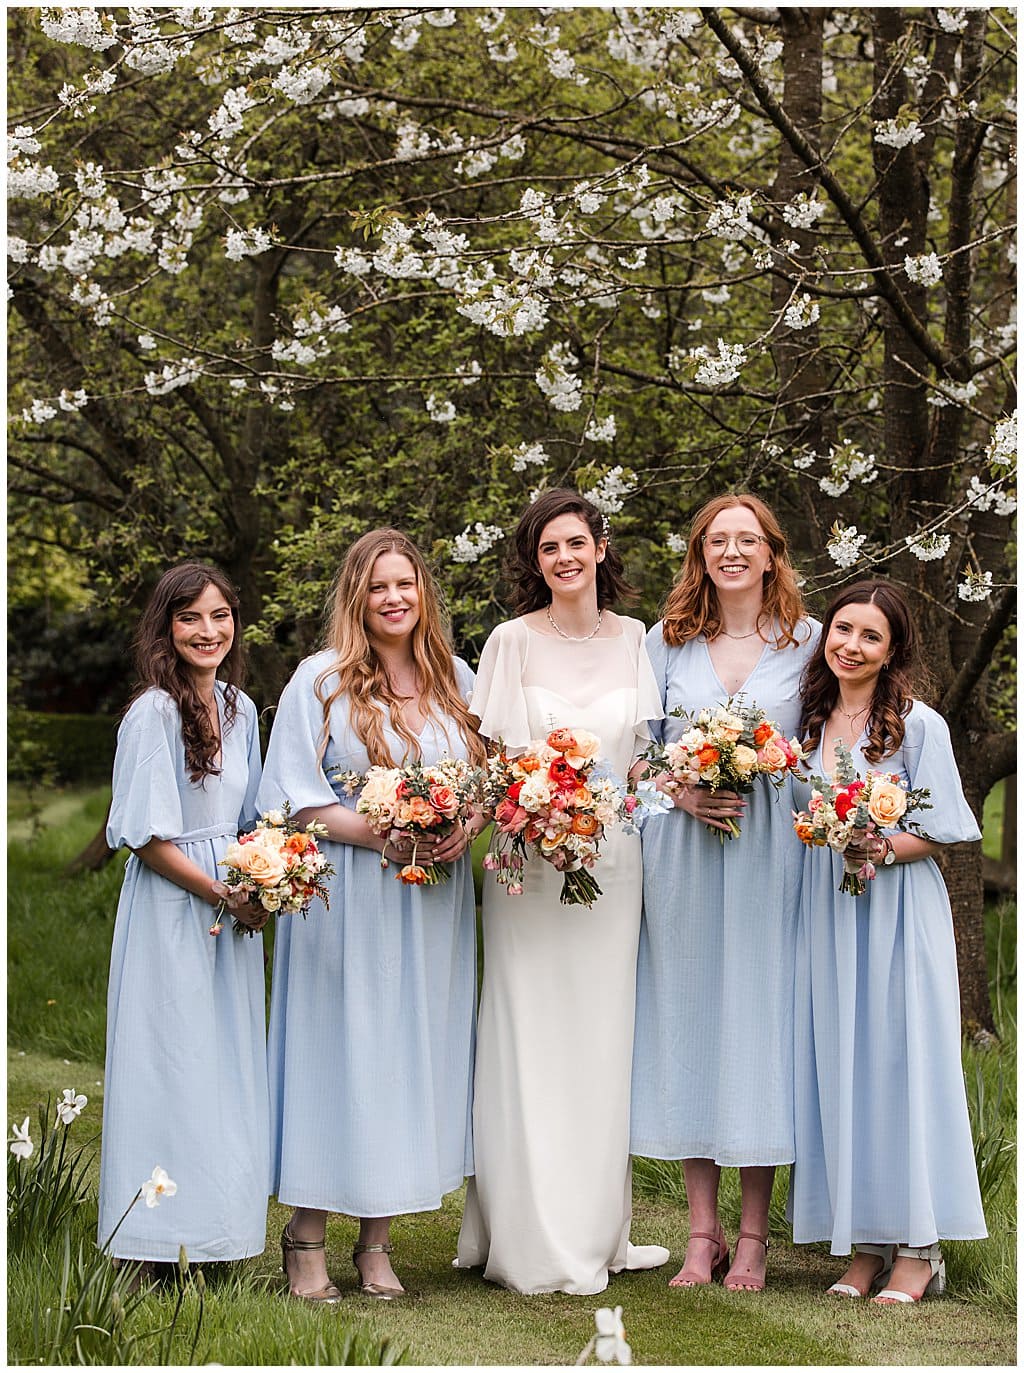 Bride and Bridesmaids with pretty spring bouquets stand in front of blossom trees in Pimhill Barn gardens